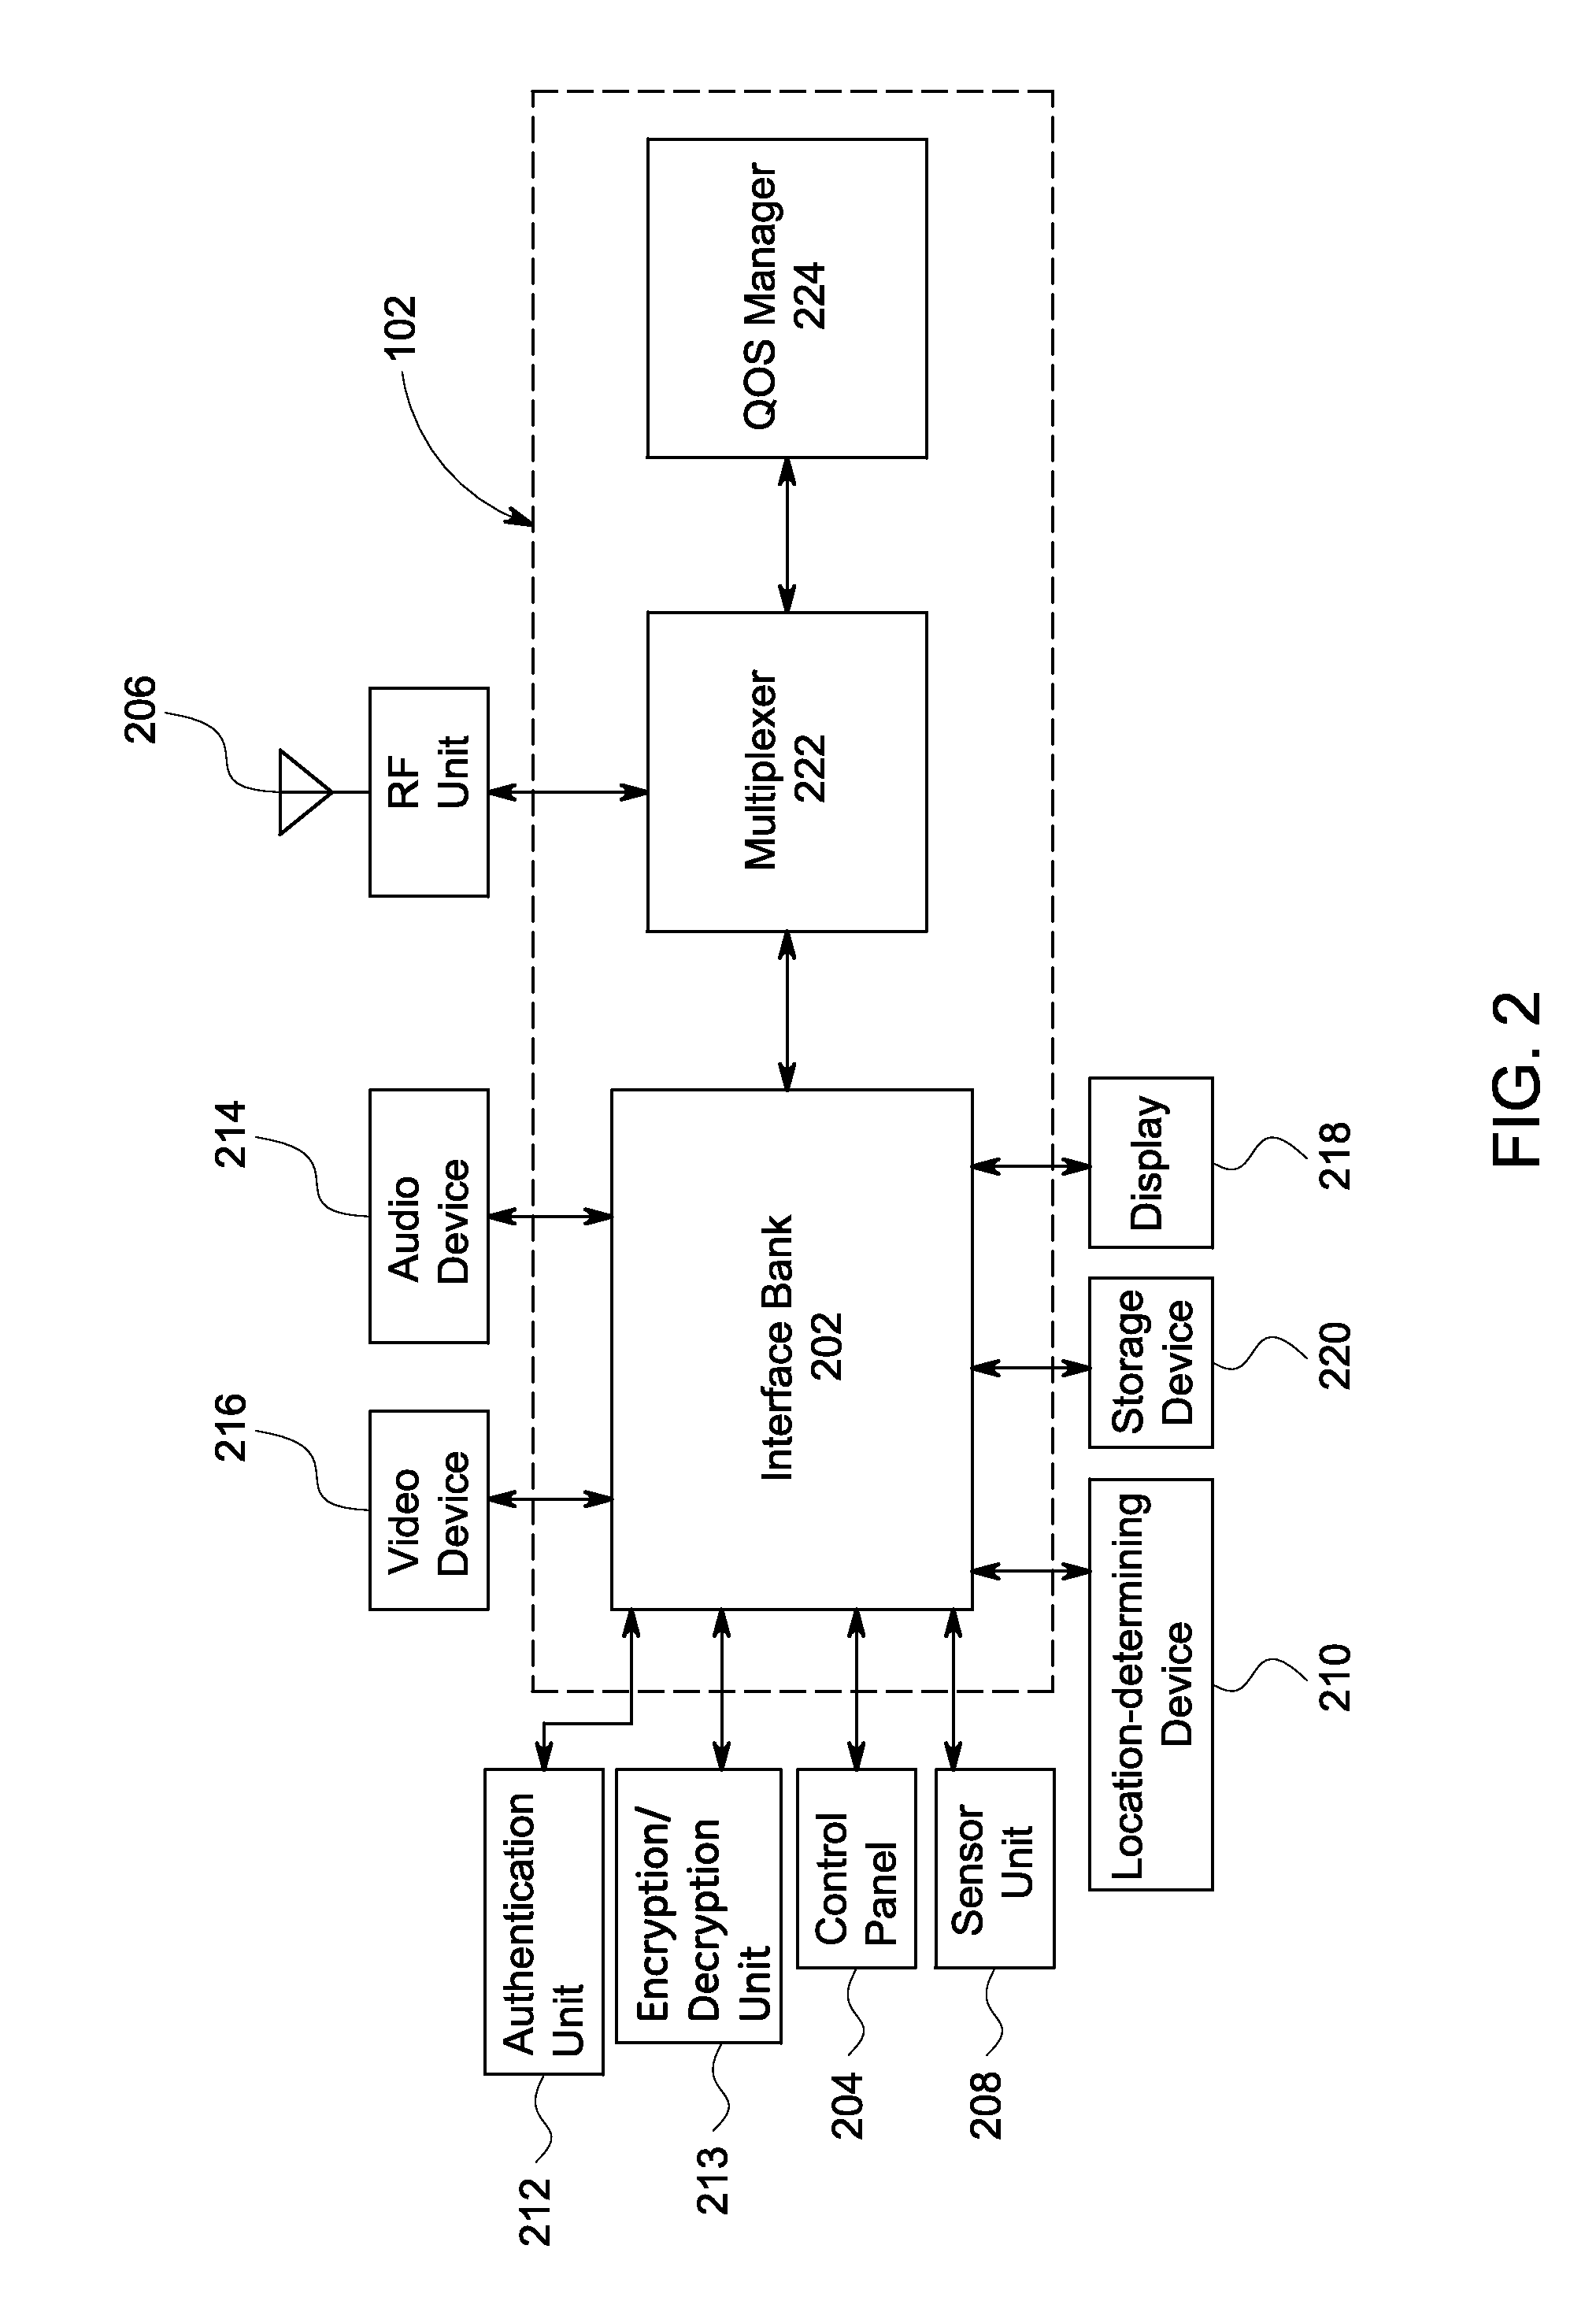 Health information telecommunications system and method